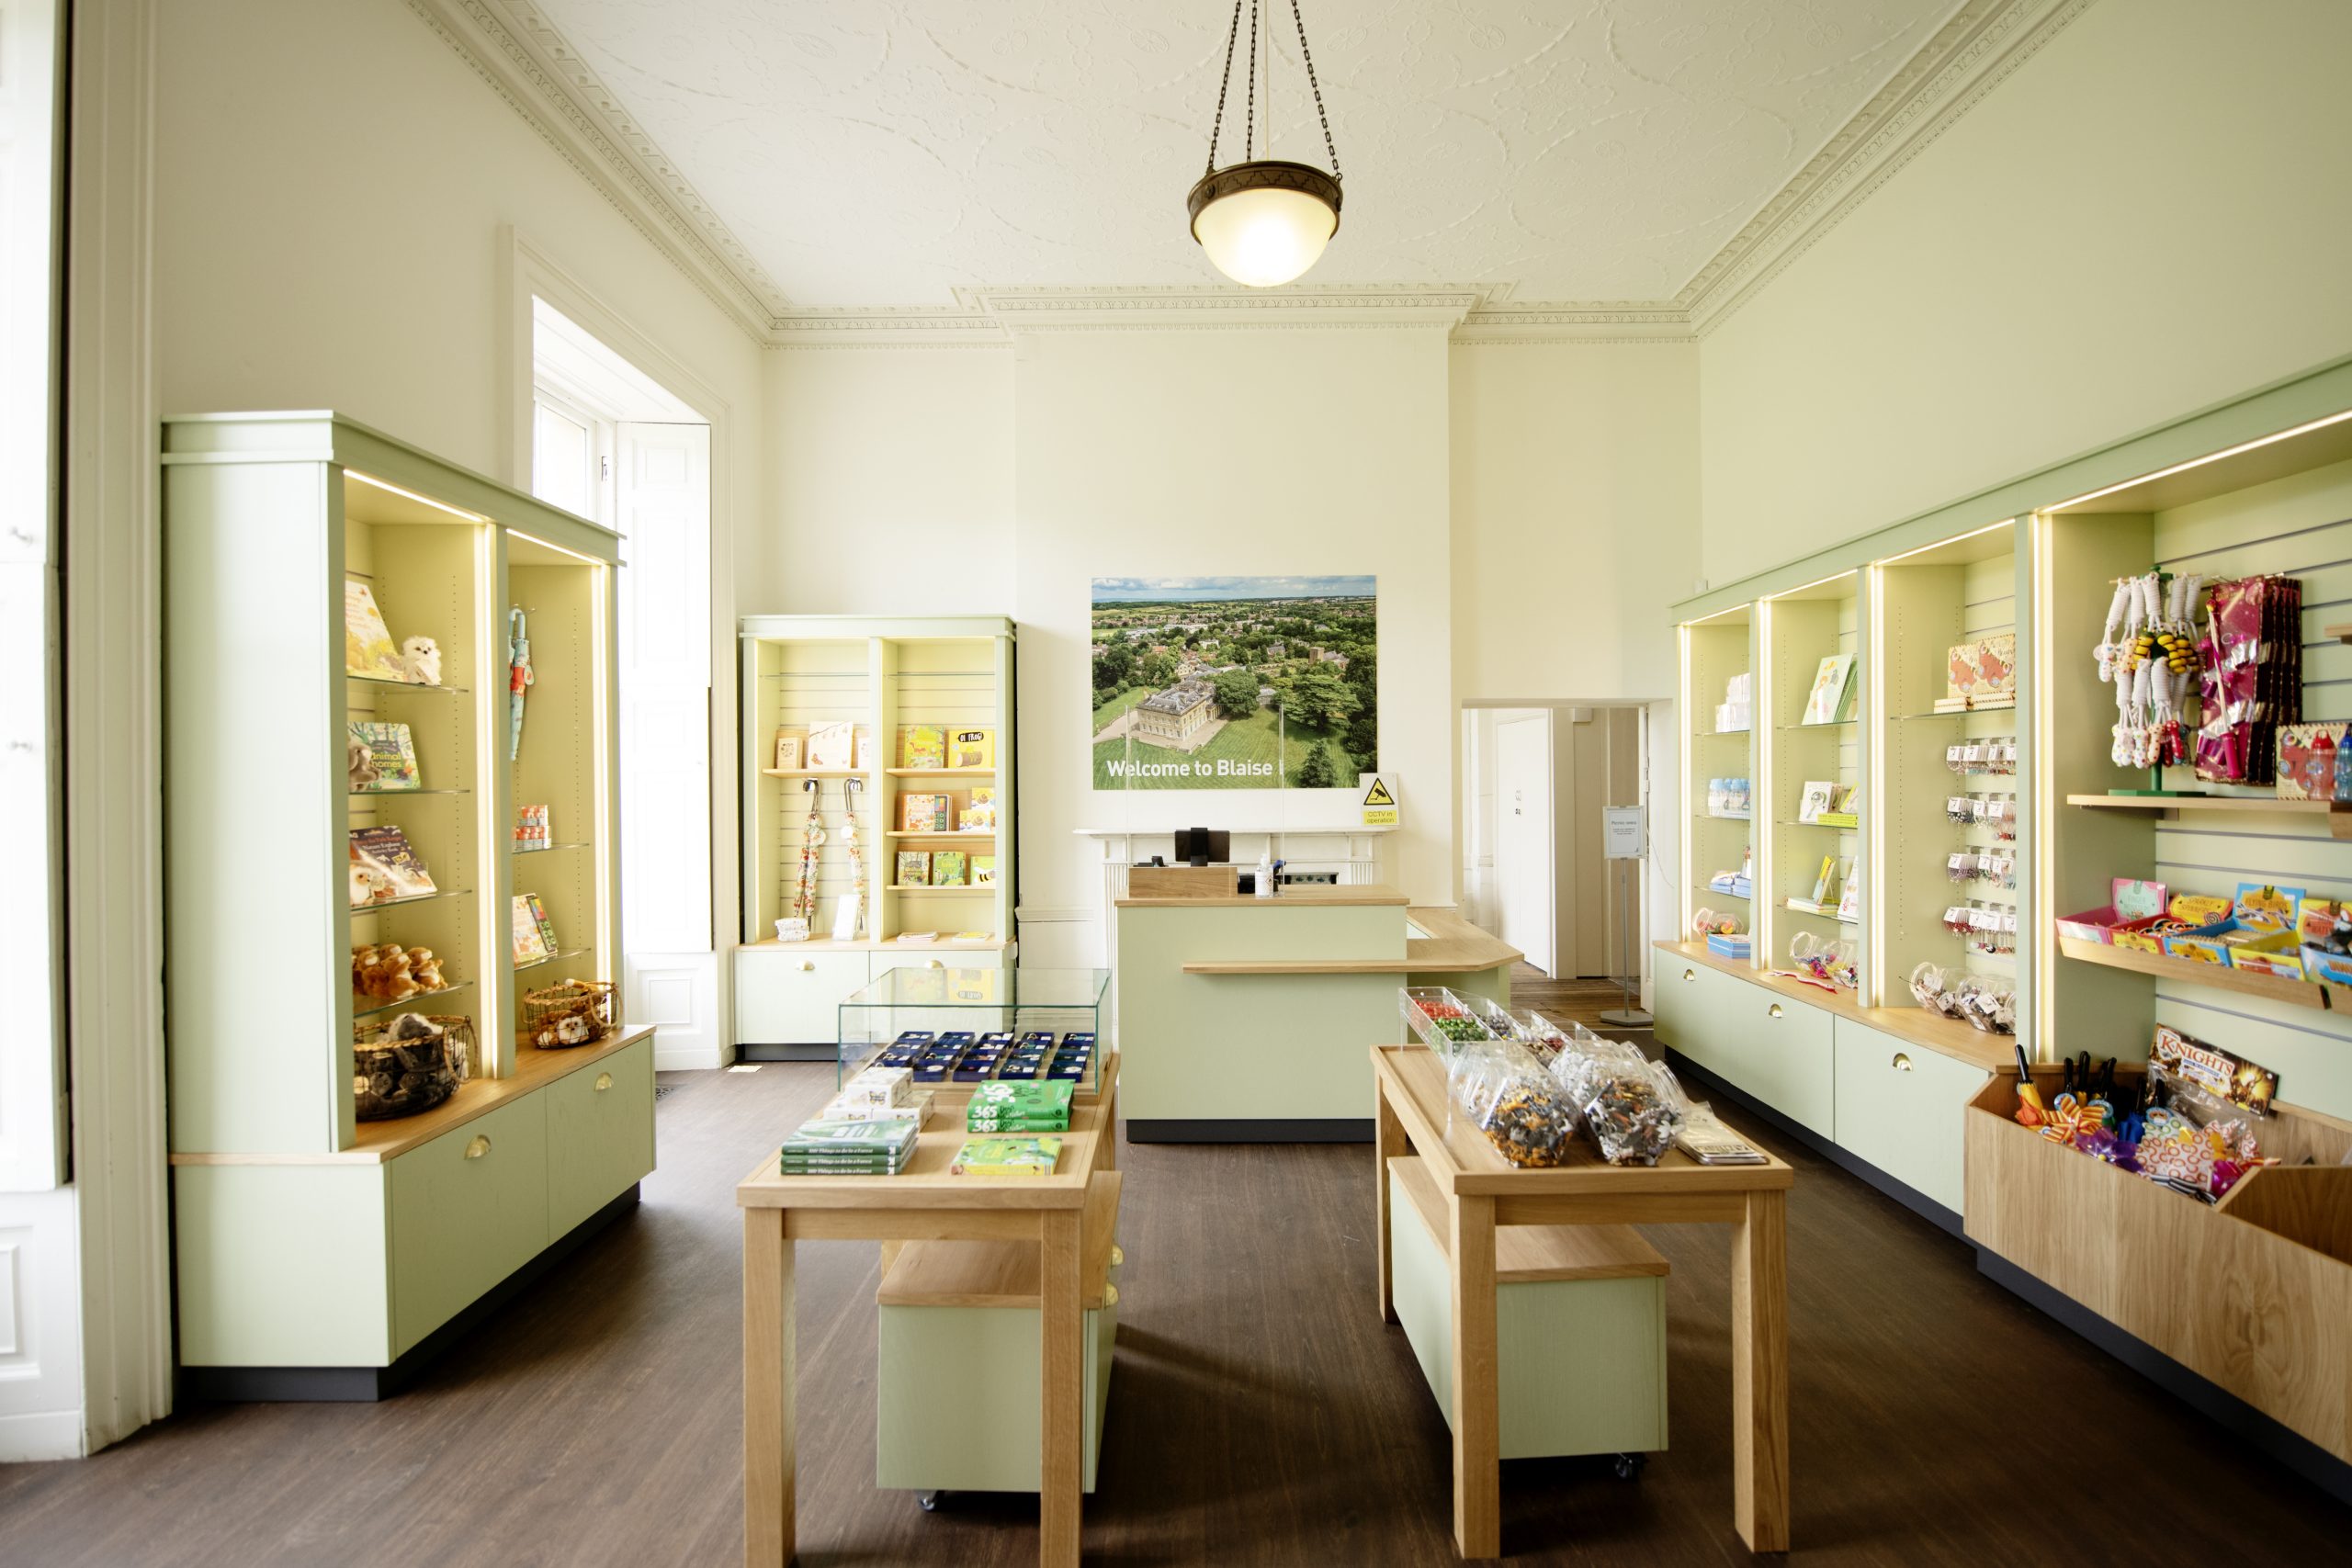 interior of a museum shop. light and airy with white walls and display cases around sides